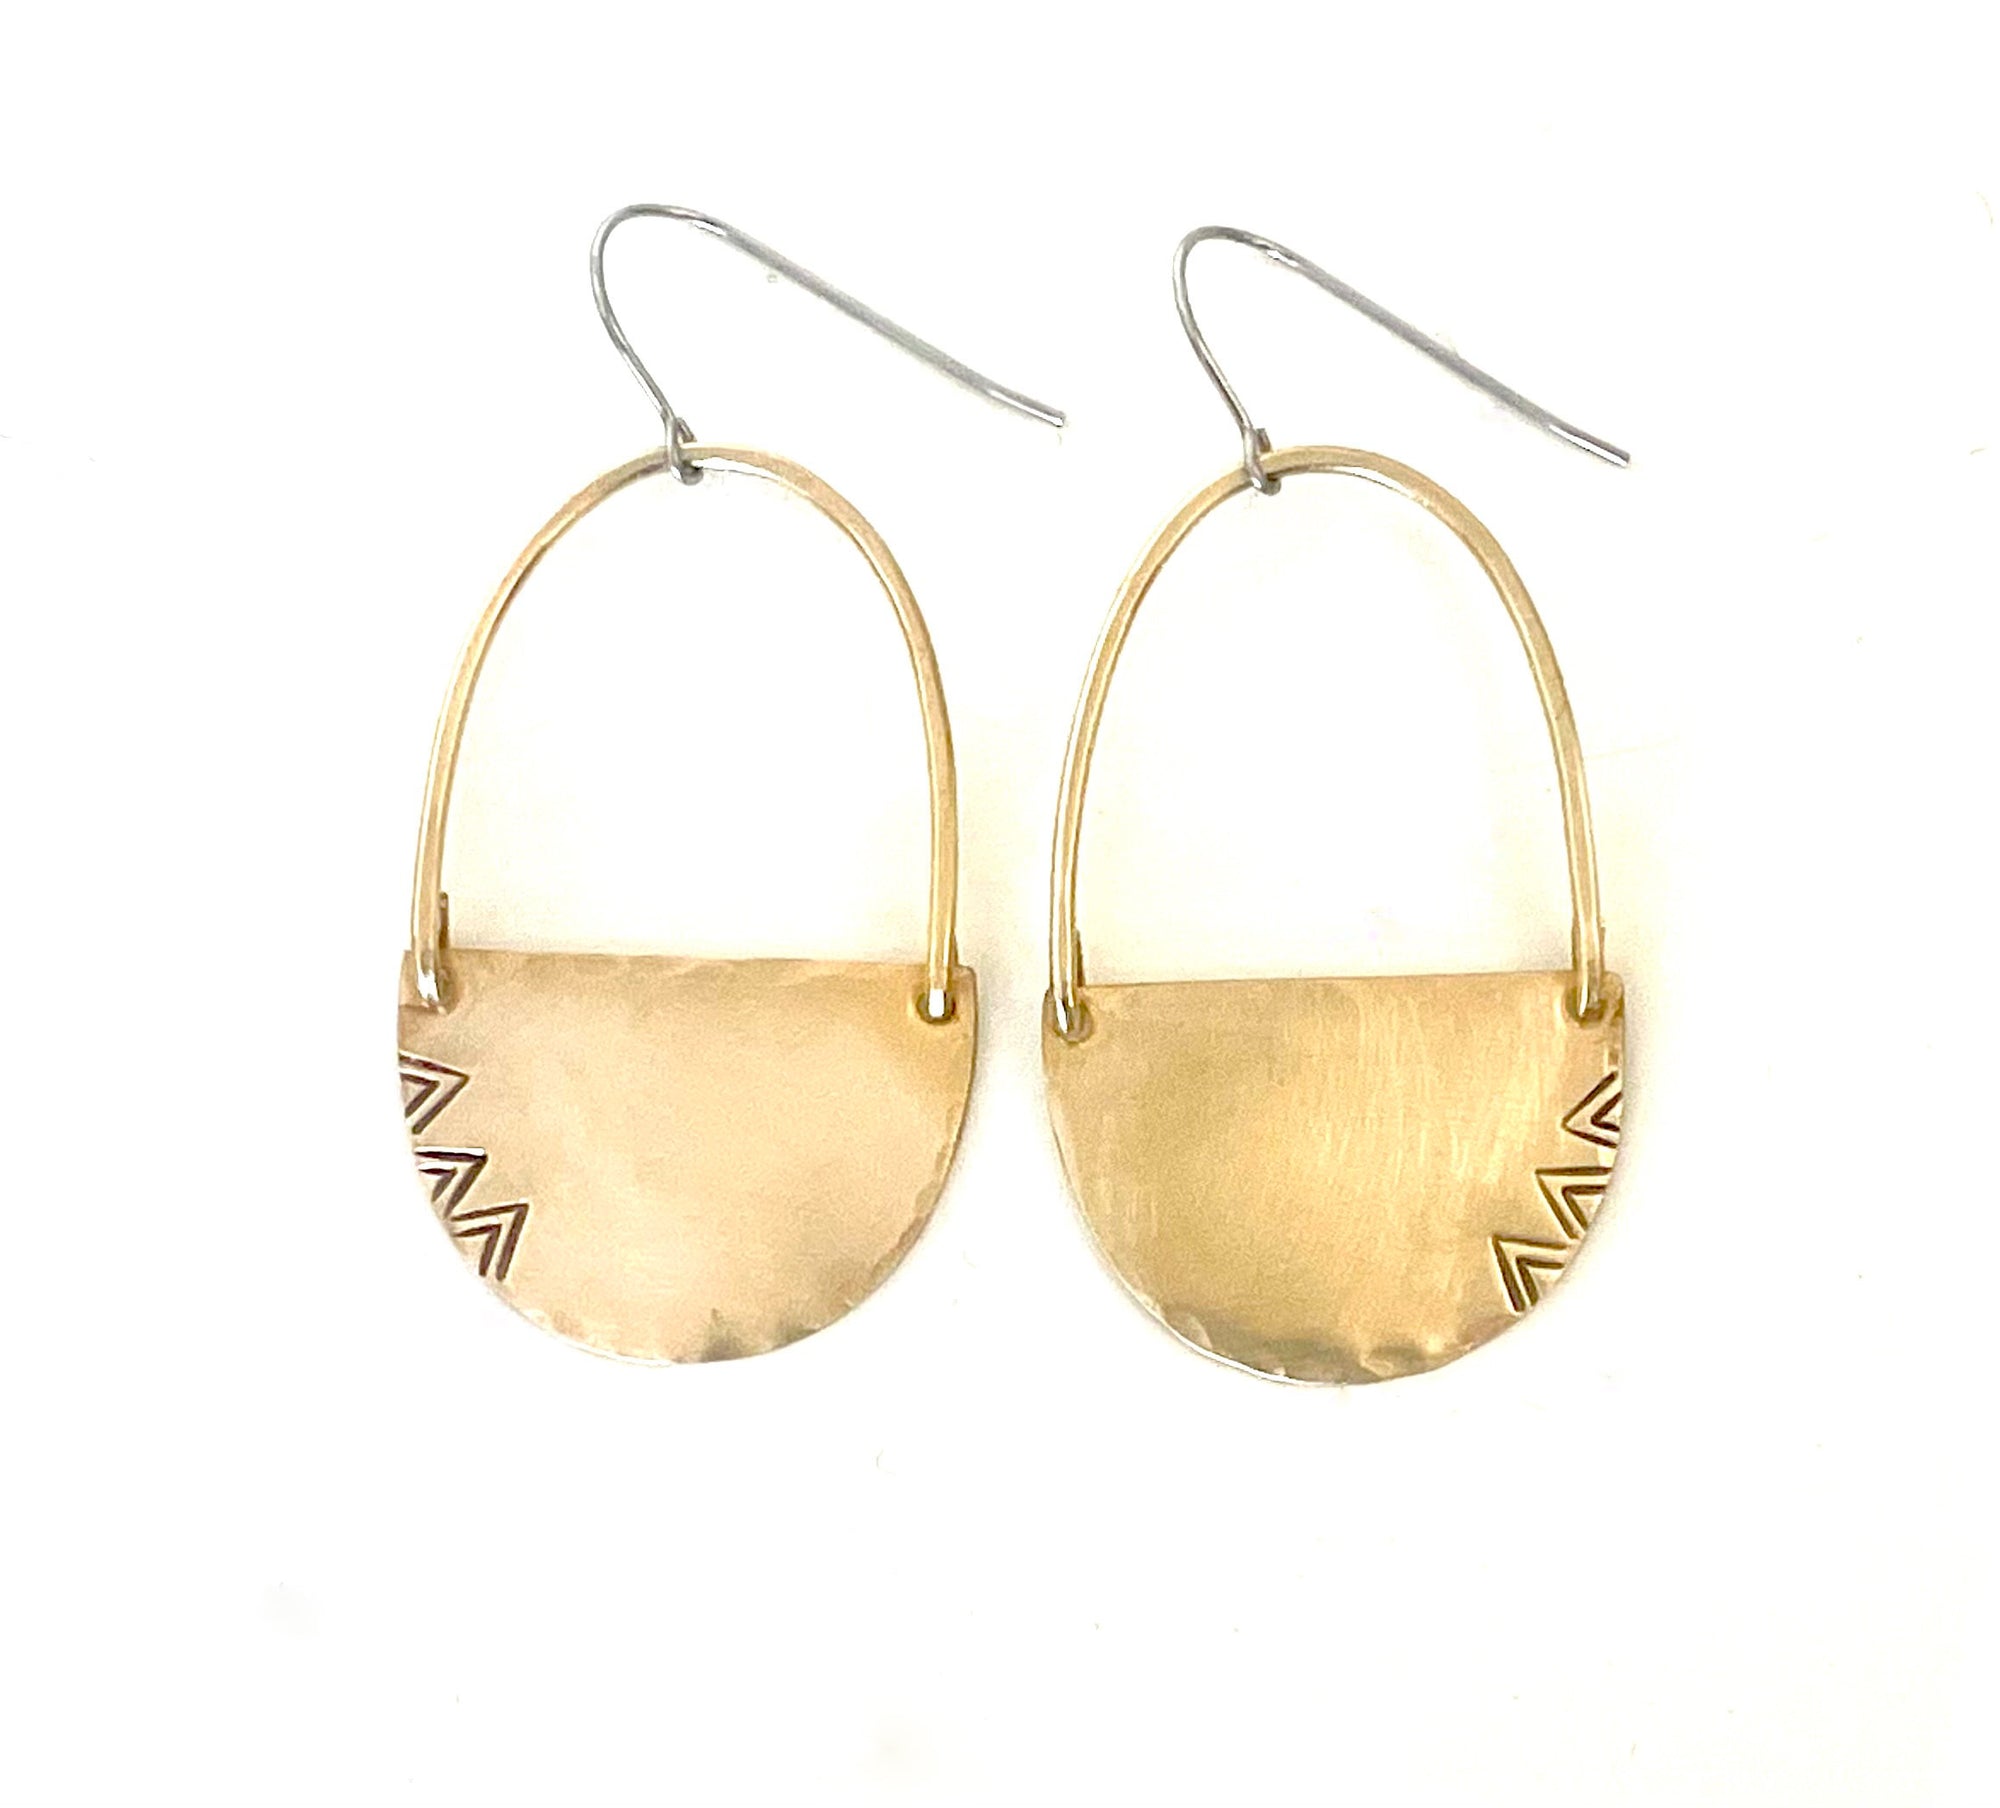 Half Moon and Wire with Chevrons Earrings